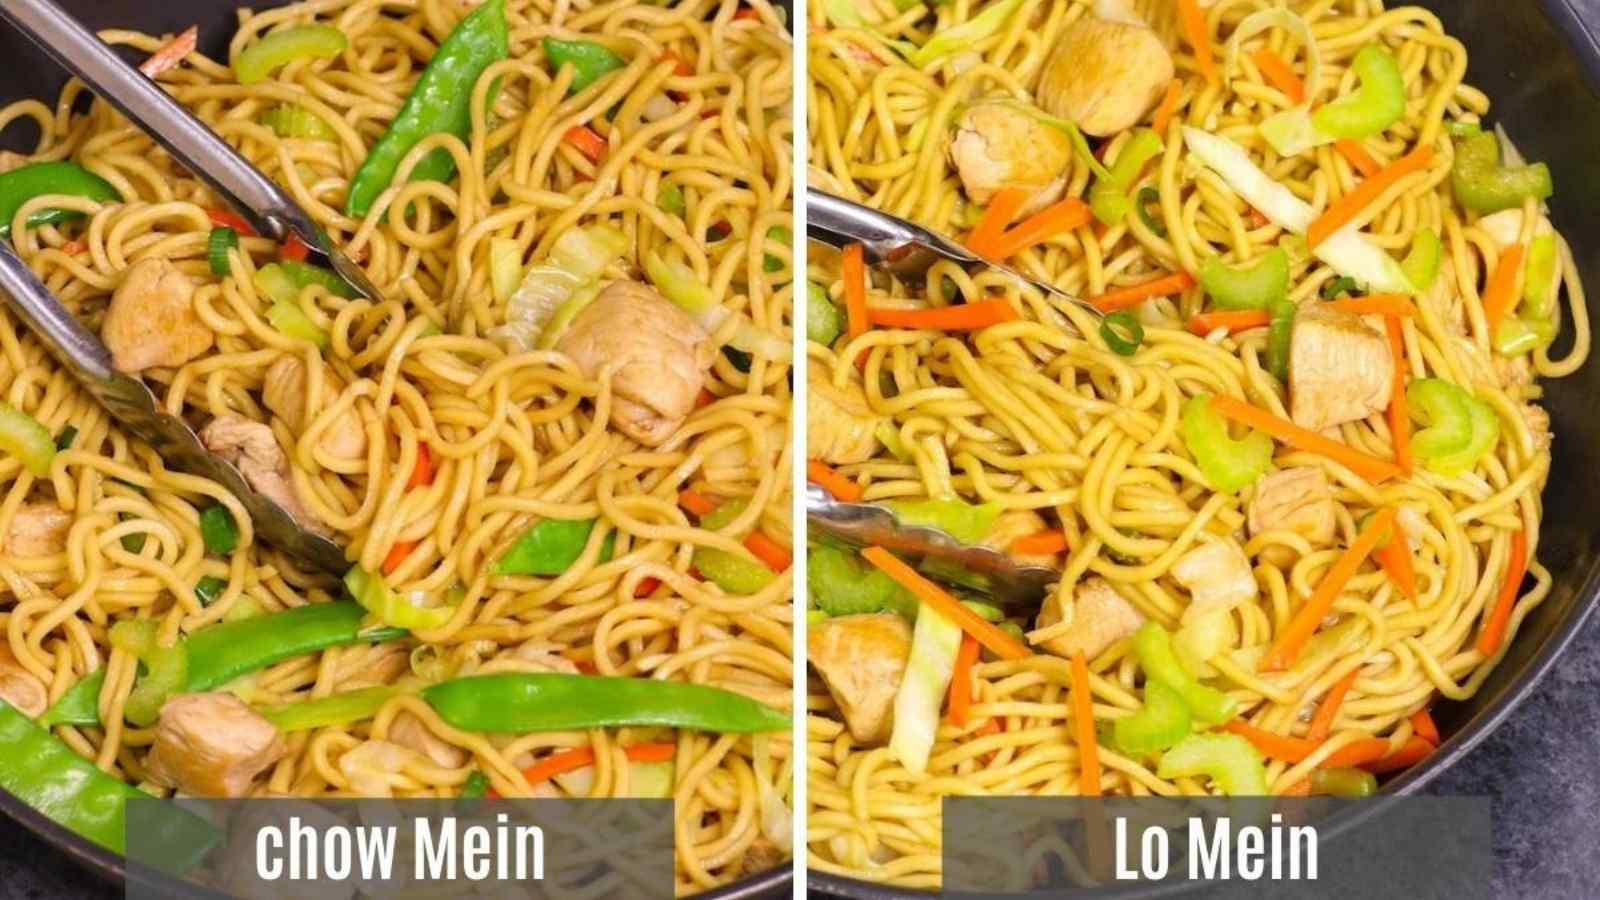 What is Chow Mein Lomein?